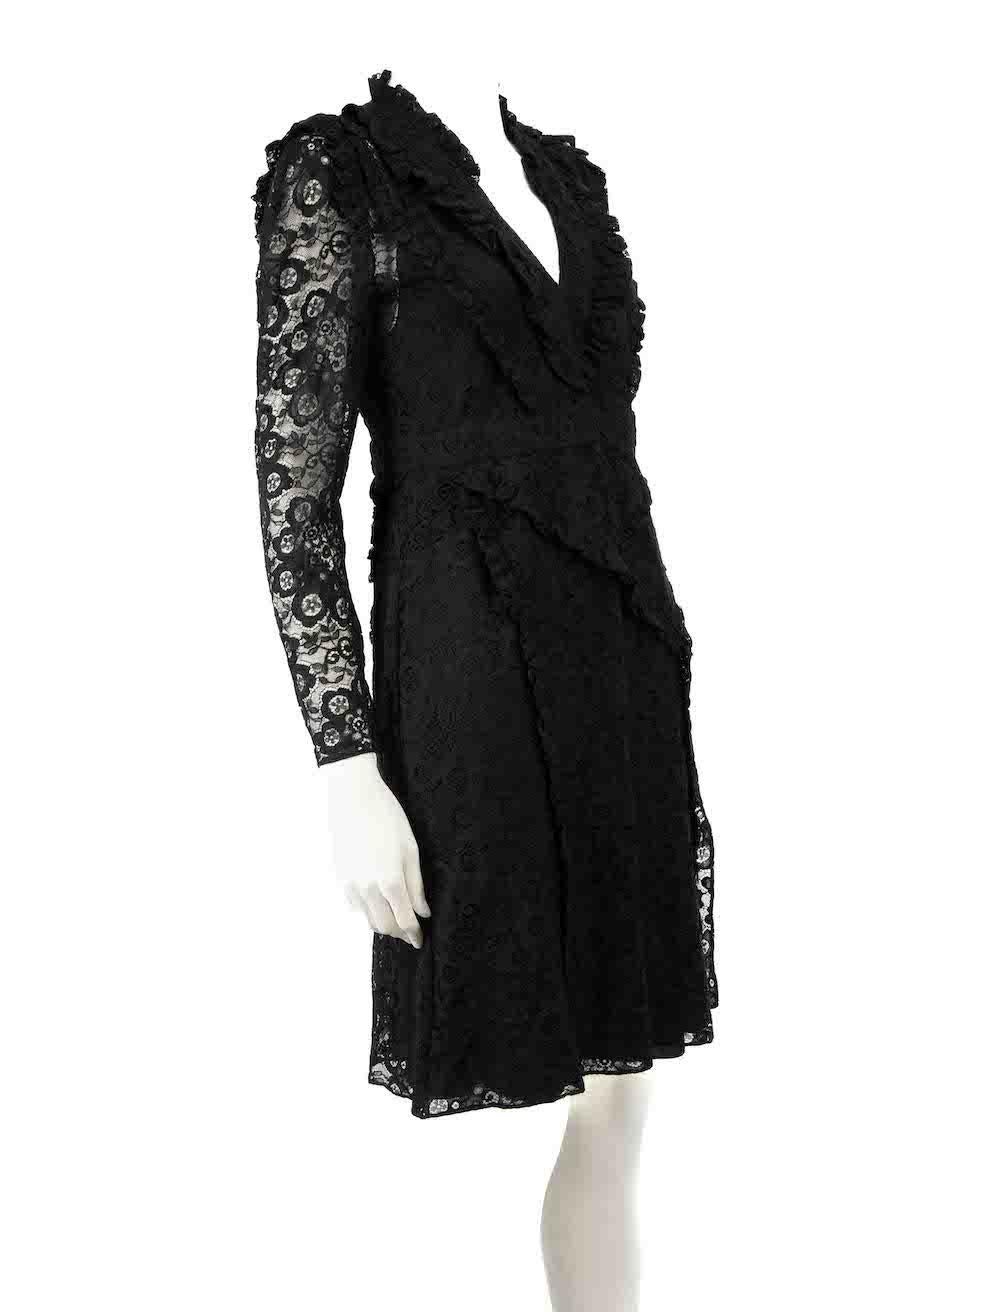 CONDITION is Very good. Minimal wear to dress is evident. Minimal wear to the lace with one or two very small stray thread ends found at the sleeves on this used Altuzarra designer resale item.
 
 
 
 Details
 
 
 Black
 
 Lace
 
 Knee length dress
